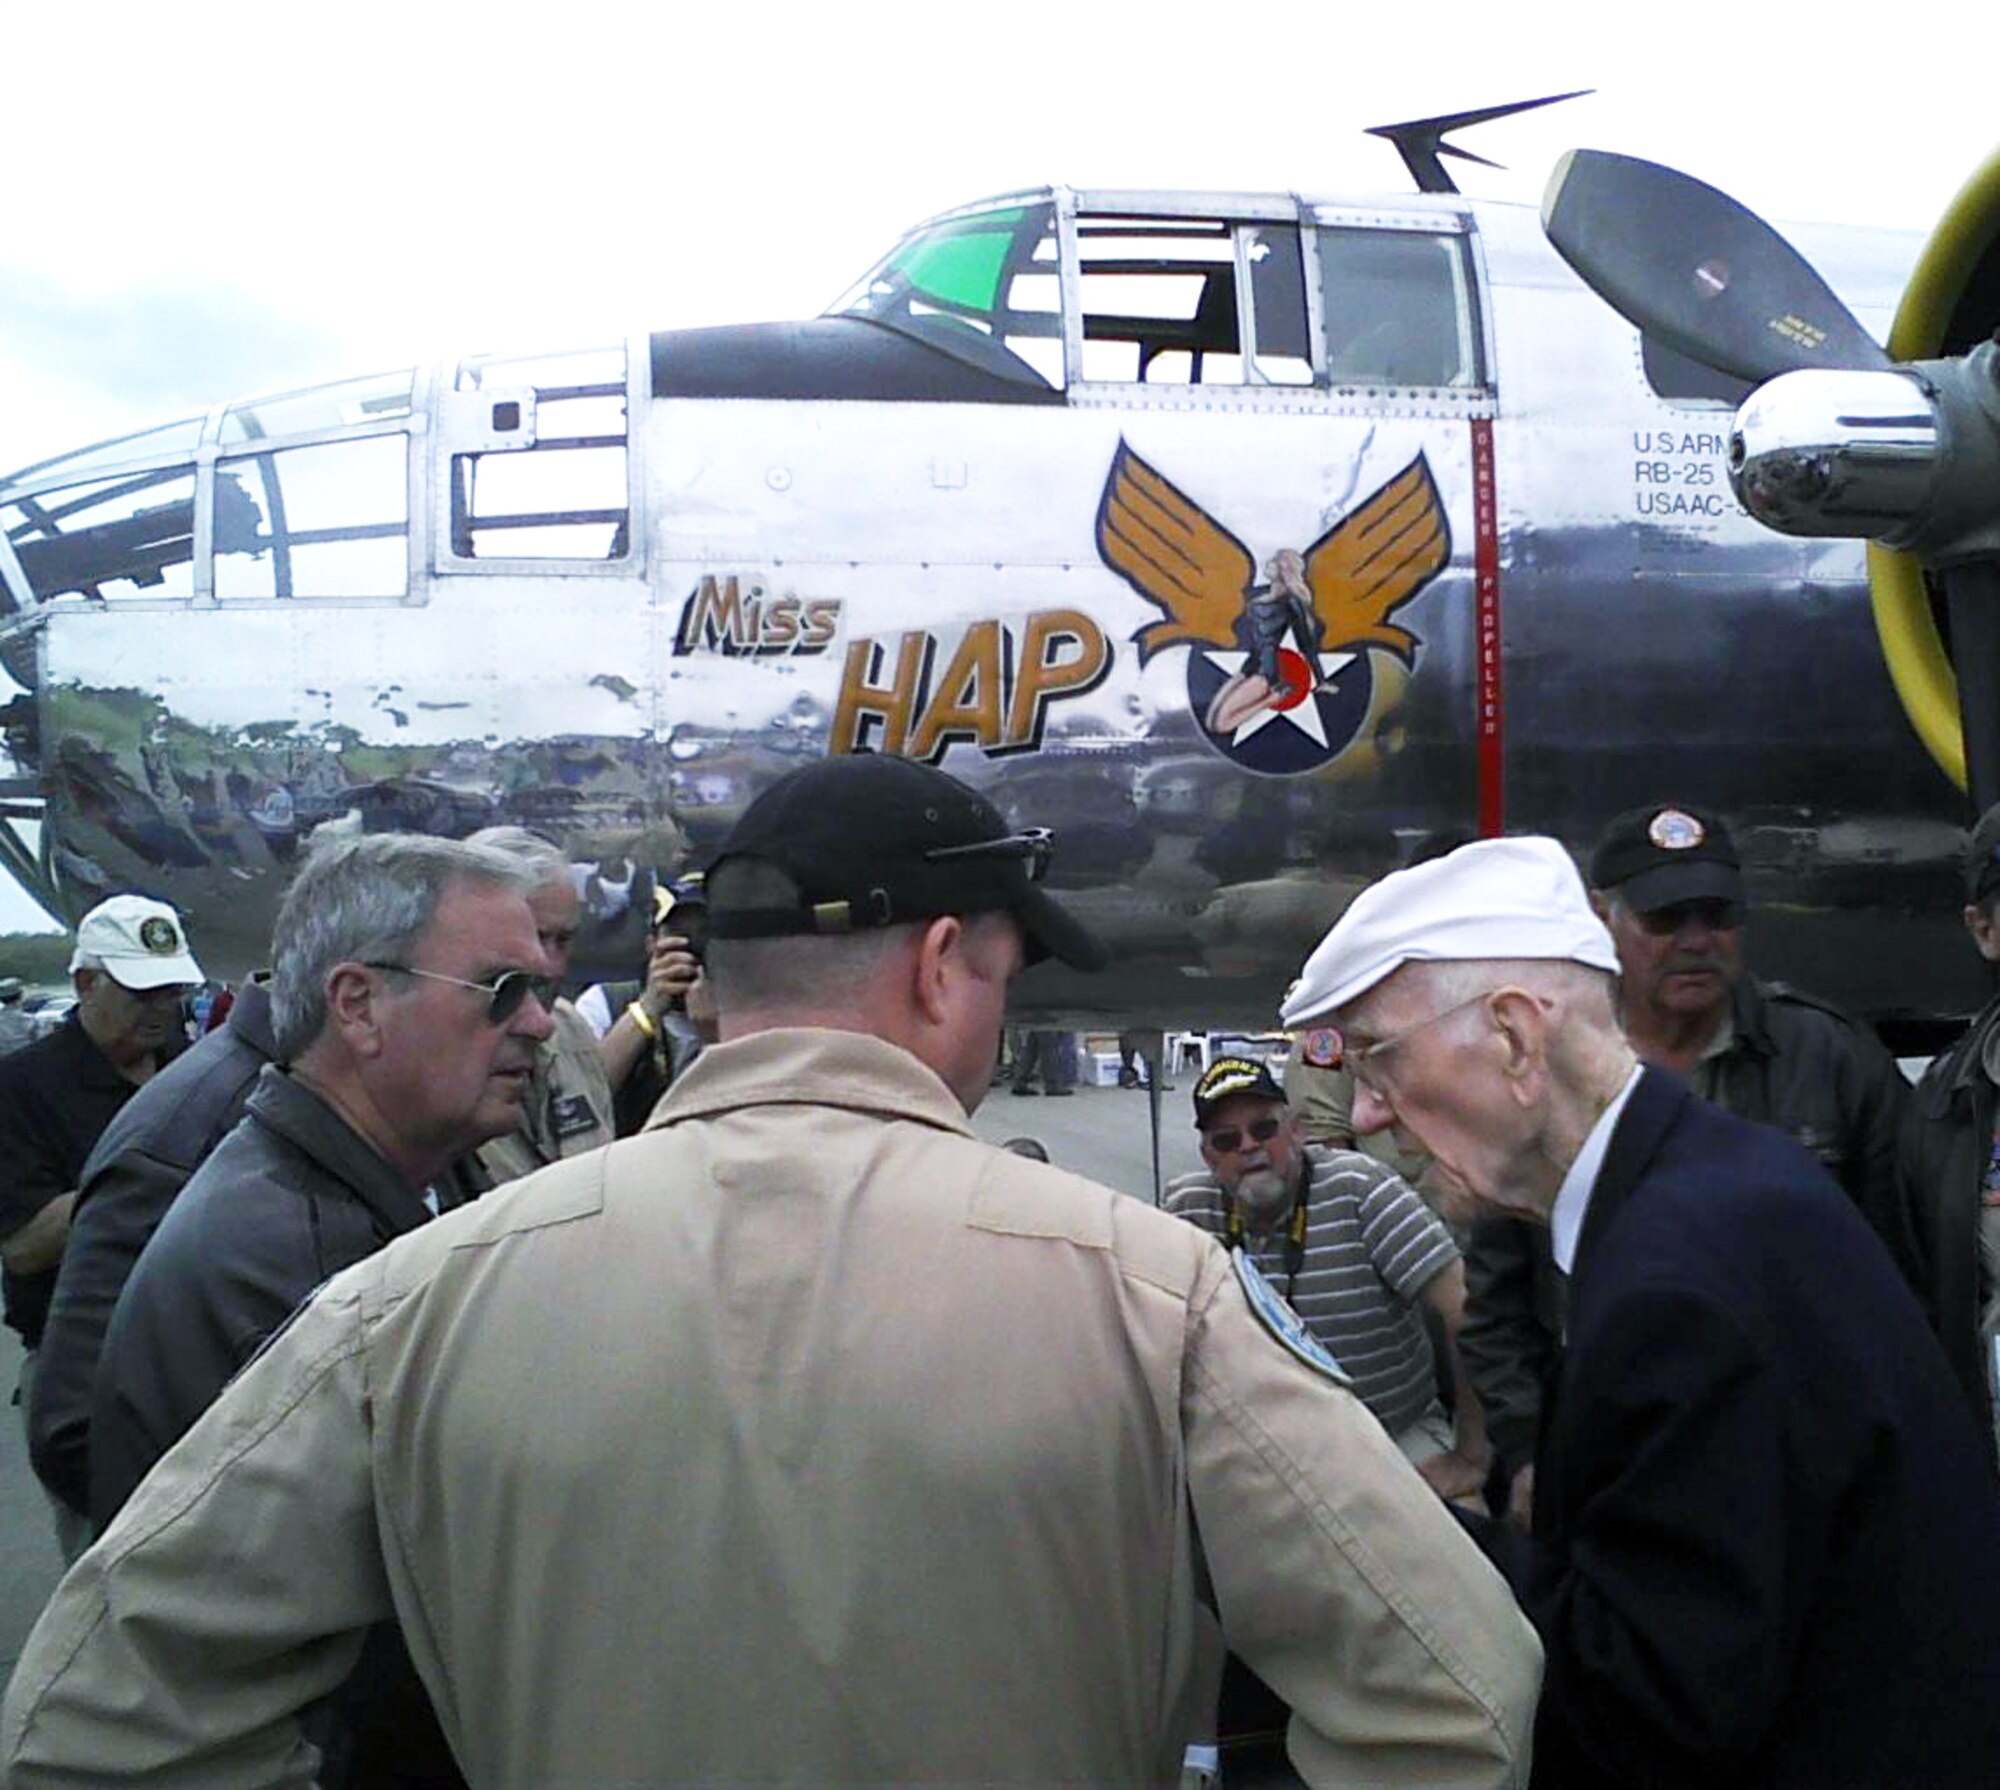 Maj. Thomas C. Griffin (right), one of five surviving members of the famous Doolittle Raiders, chats with crew members of the Miss Hap B-25 bomber at the National Museum of the United States Air Force April 17, 2012. Griffin and other Raiders are at the museum this week for the 70th anniversary of the famous Doolittle Raid. On April 18, 1942, 80 airmen took off in B-25 bombers from the aircraft carrier Hornet on a top-secret mission to bomb Japan. Some 20 B-25s gathered at the museum and will take part in a memorial flyover April 18. (U.S. Air Force photo/Ron Fry)